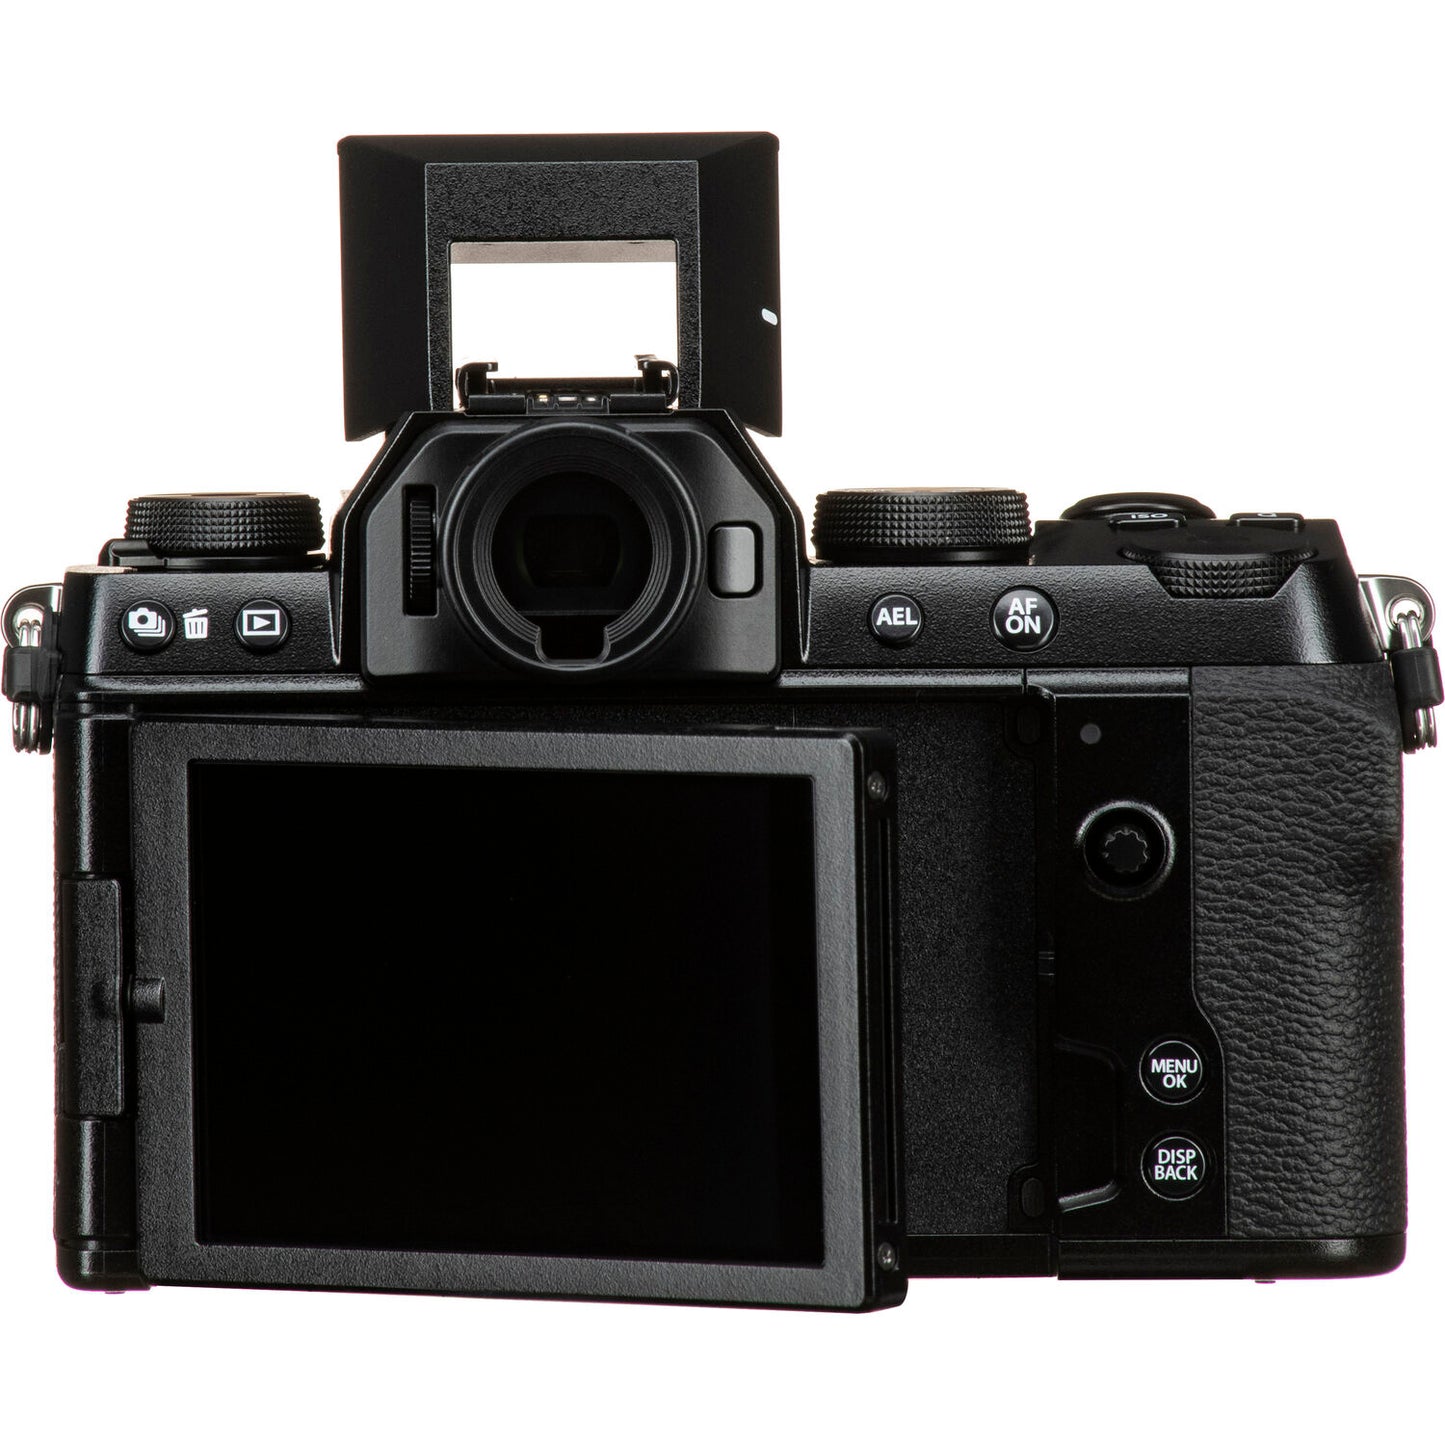 Fujifilm X-S10 Mirrorless Camera with Articulating Touchscreen LCD, Auto and Manual Focus Modes and Bluetooth / Wifi Connectivity Body Only Black